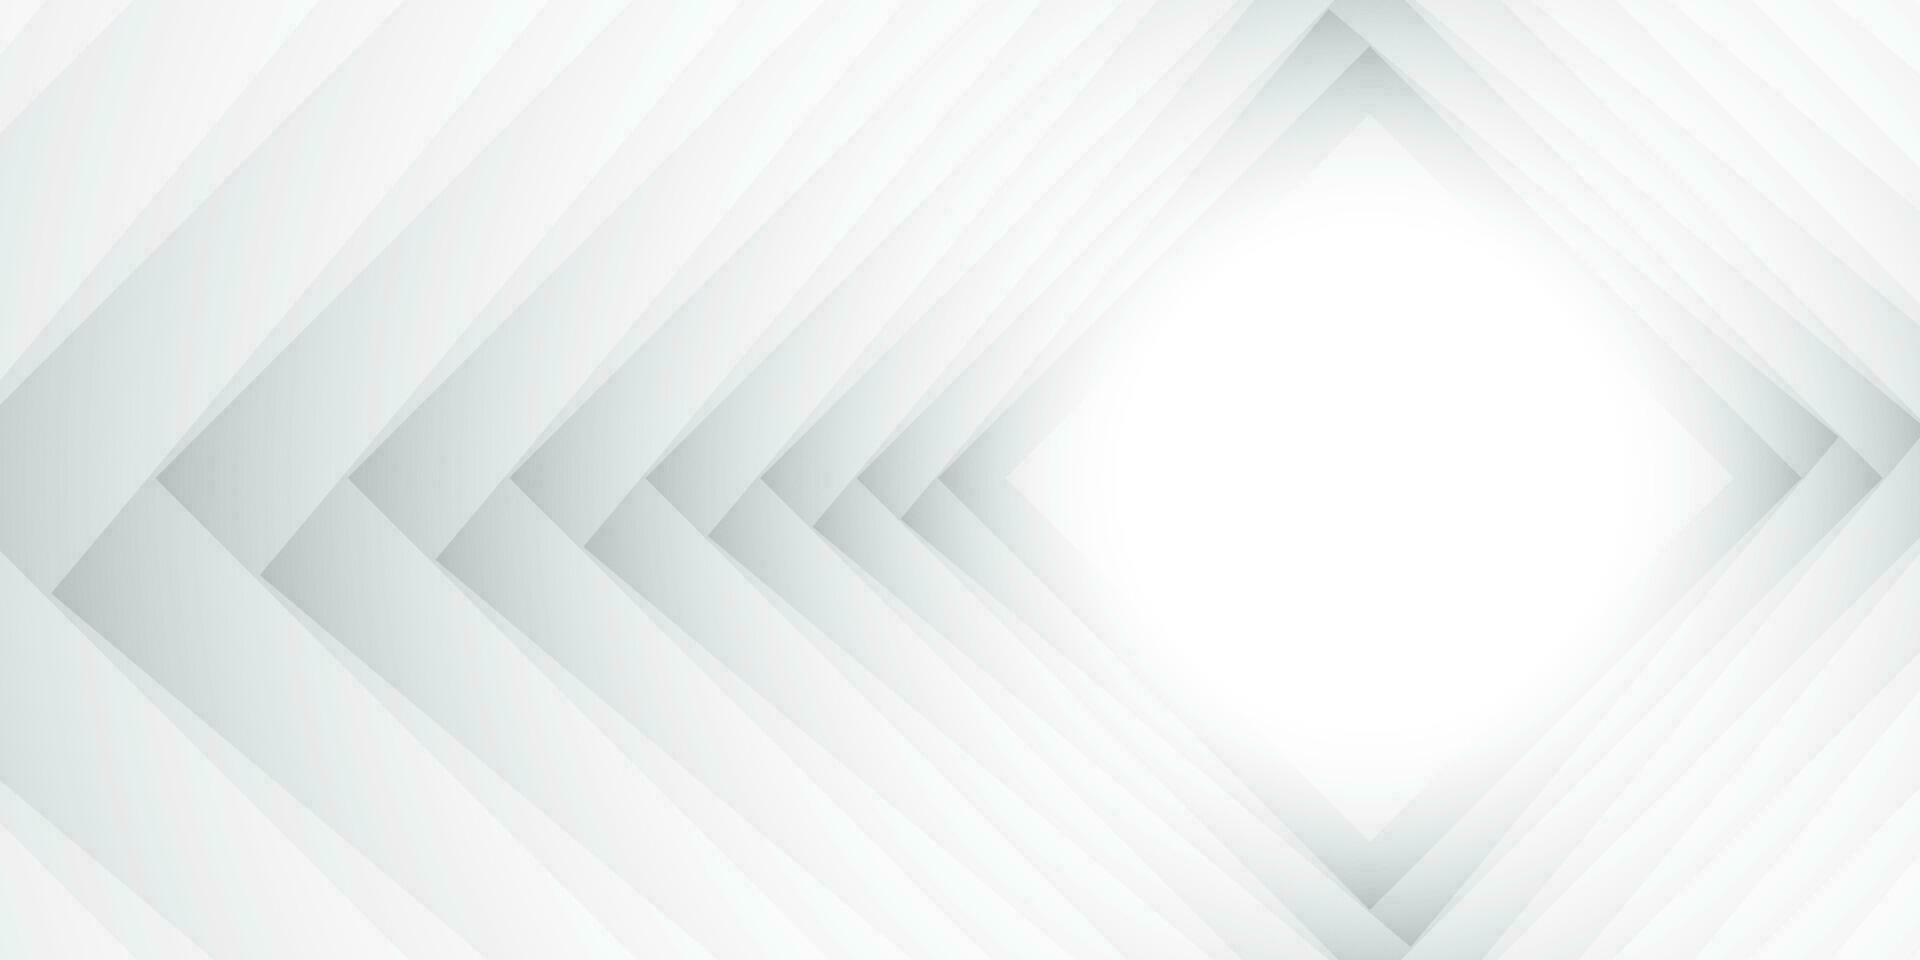 Abstract  white and gray color, modern design stripes background with geometric rectangle shape. Vector illustration.